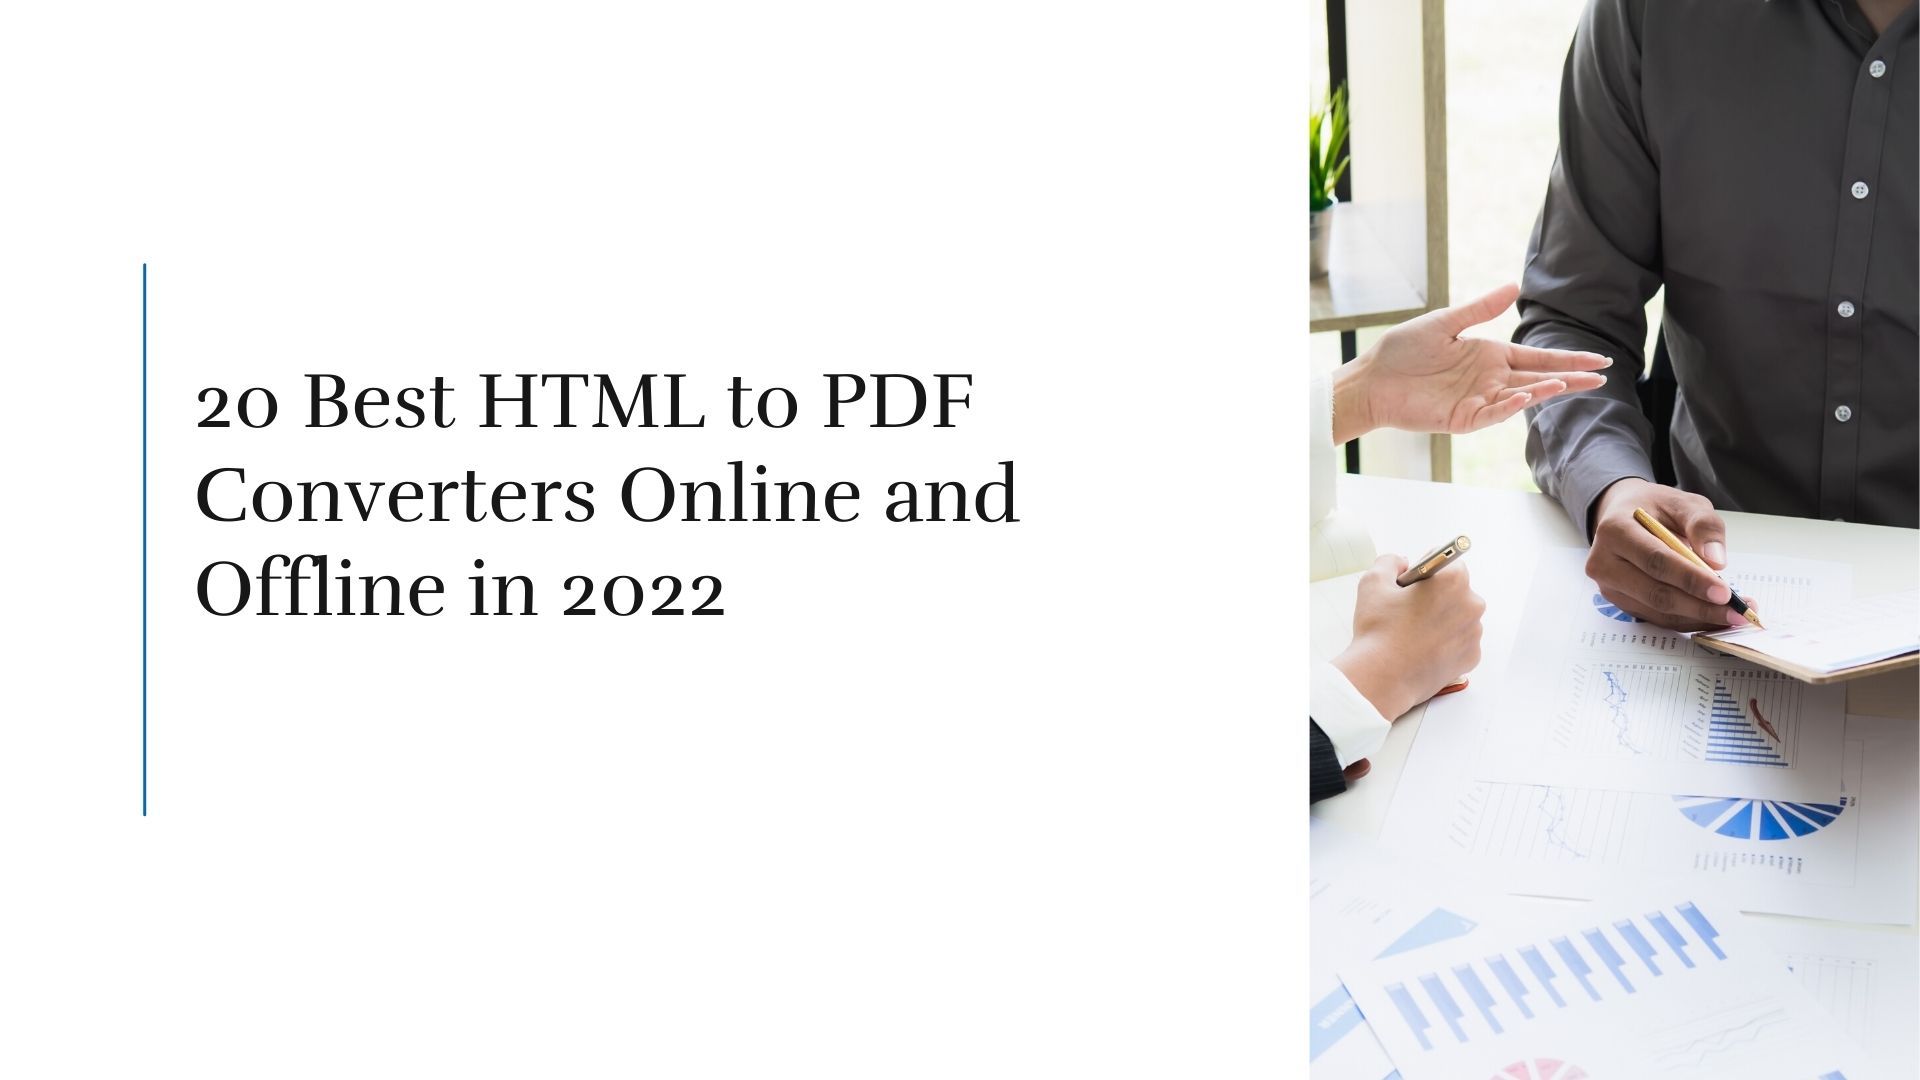 20 Best HTML to pdf converters online and offline in 2022